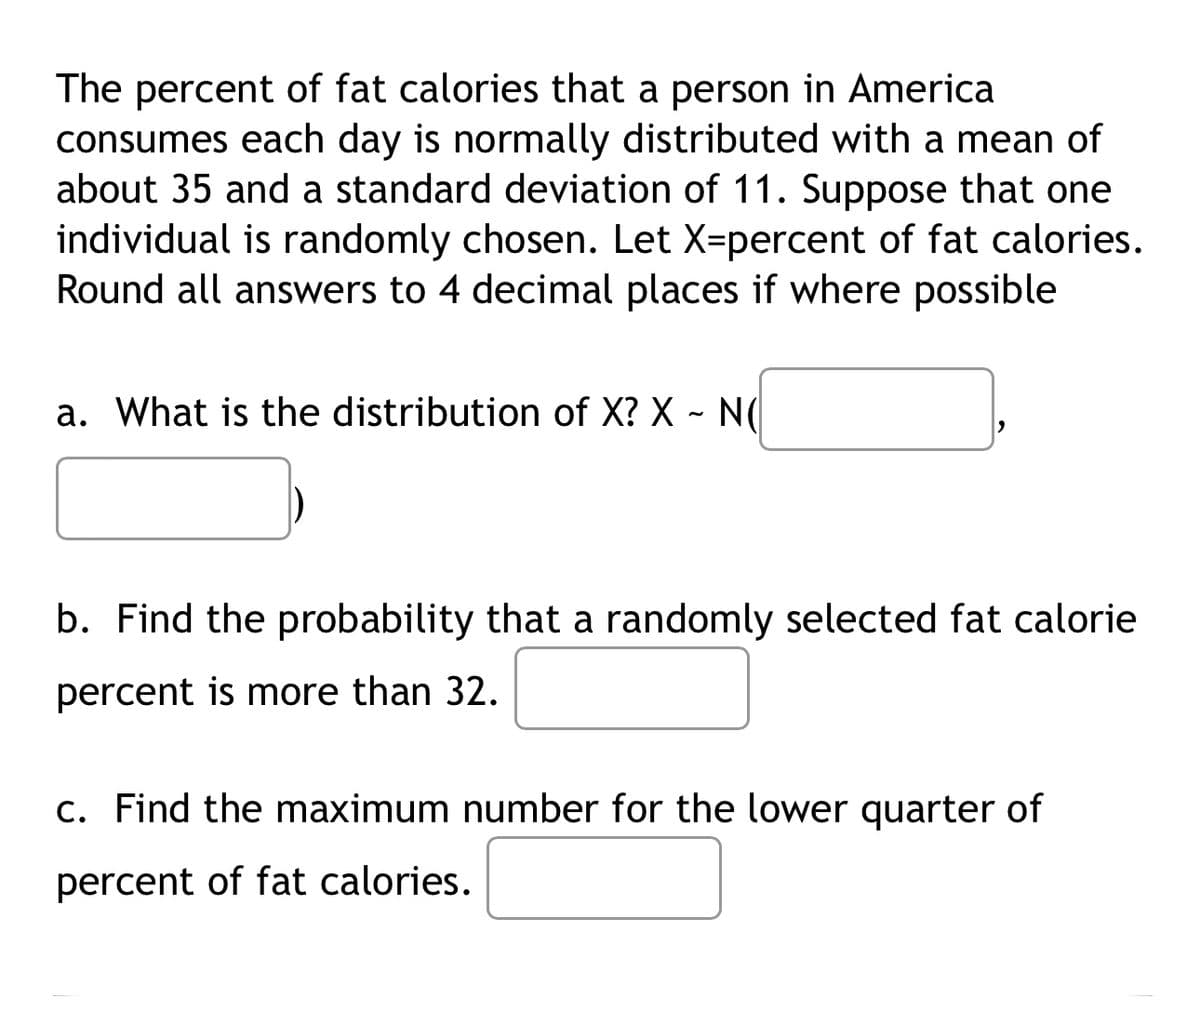 The percent of fat calories that a person in America
consumes each day is normally distributed with a mean of
about 35 and a standard deviation of 11. Suppose that one
individual is randomly chosen. Let X-percent of fat calories.
Round all answers to 4 decimal places if where possible
a. What is the distribution of X? X - N(
b. Find the probability that a randomly selected fat calorie
percent is more than 32.
c. Find the maximum number for the lower quarter of
percent of fat calories.